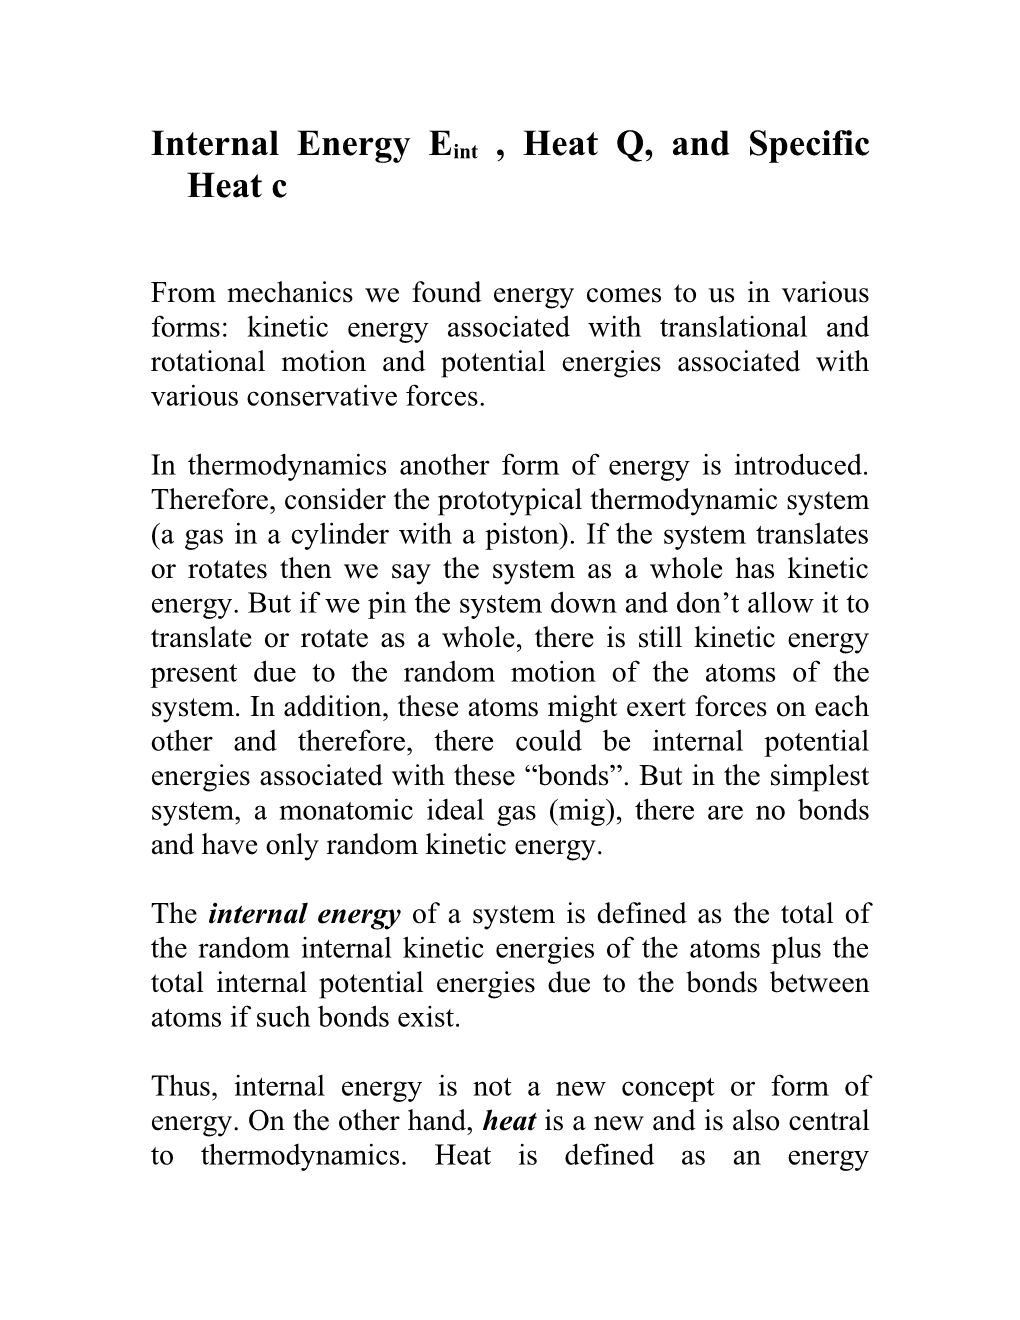 Internal Energy, Heat, and Specific Heat